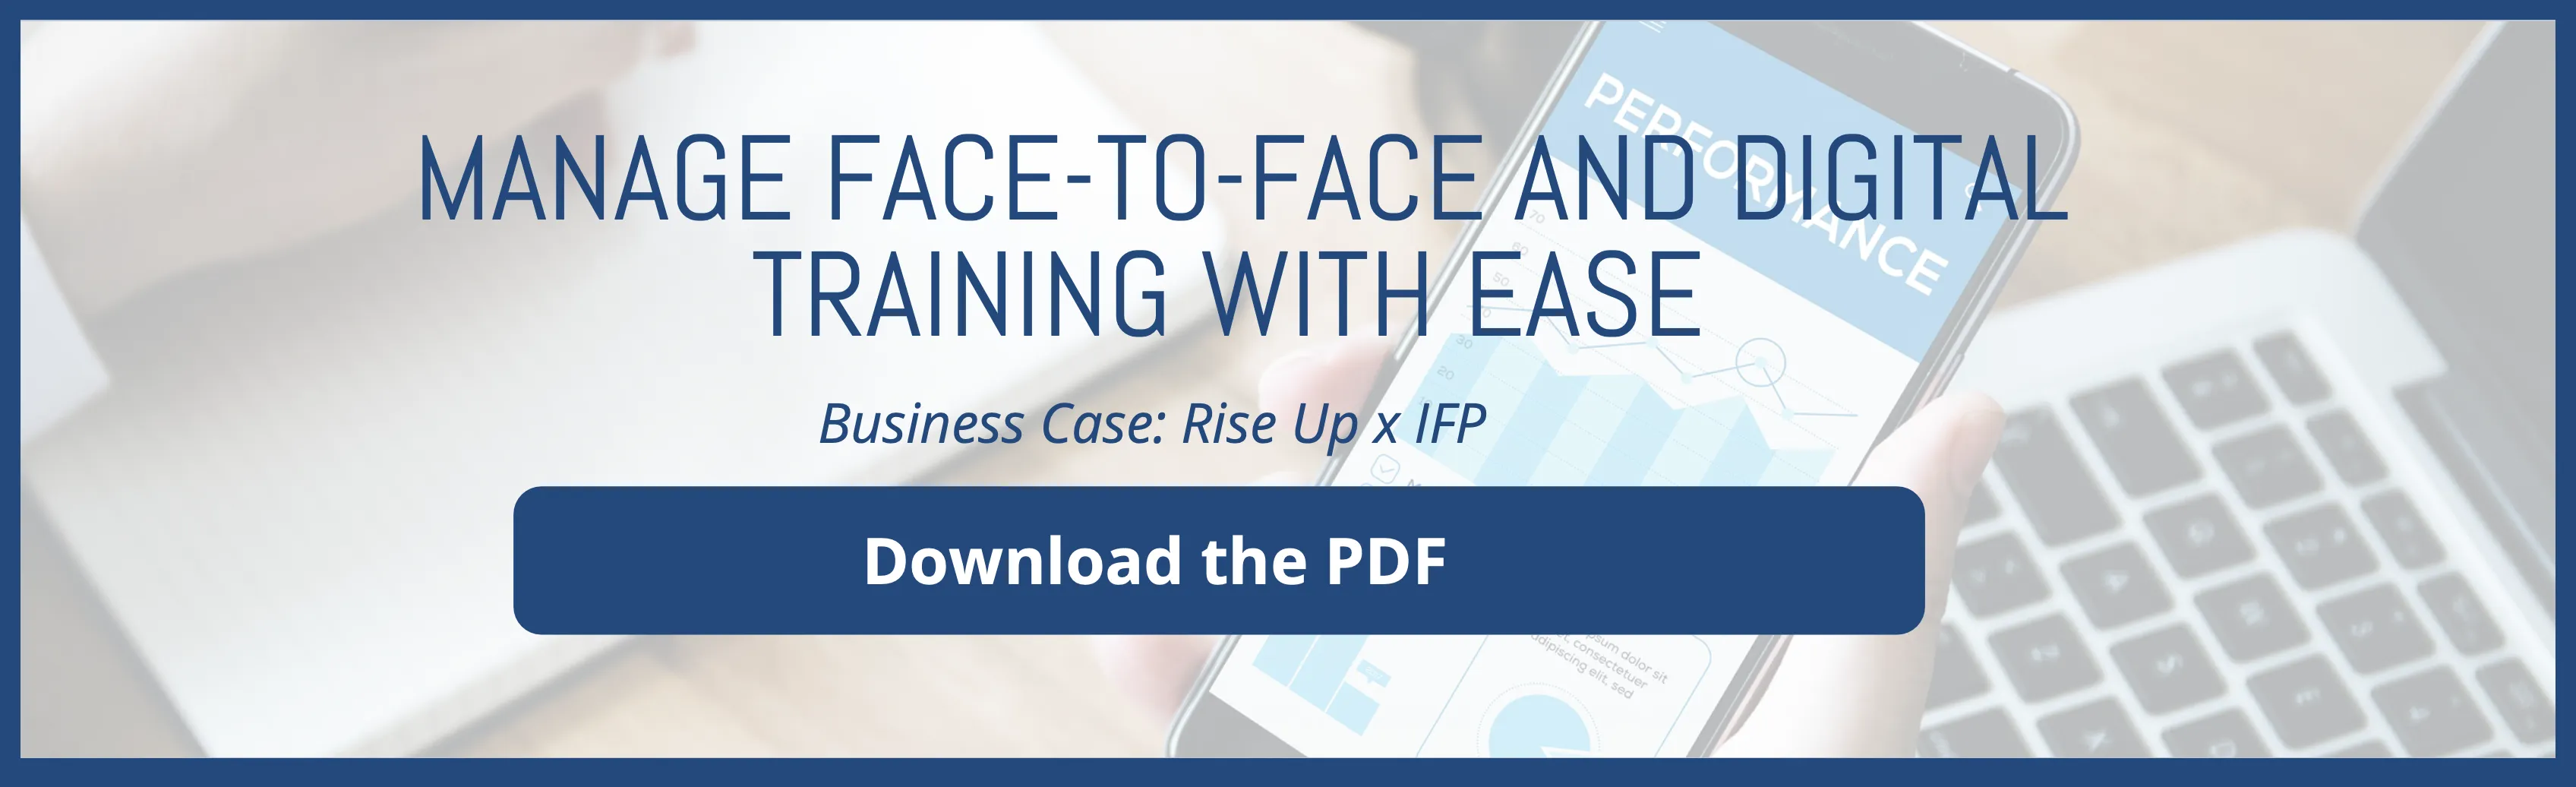 MANAGE FACE-TO-FACE AND DIGITAL TRAINING with ease BUSINESS CASE: Rise Up x IFP